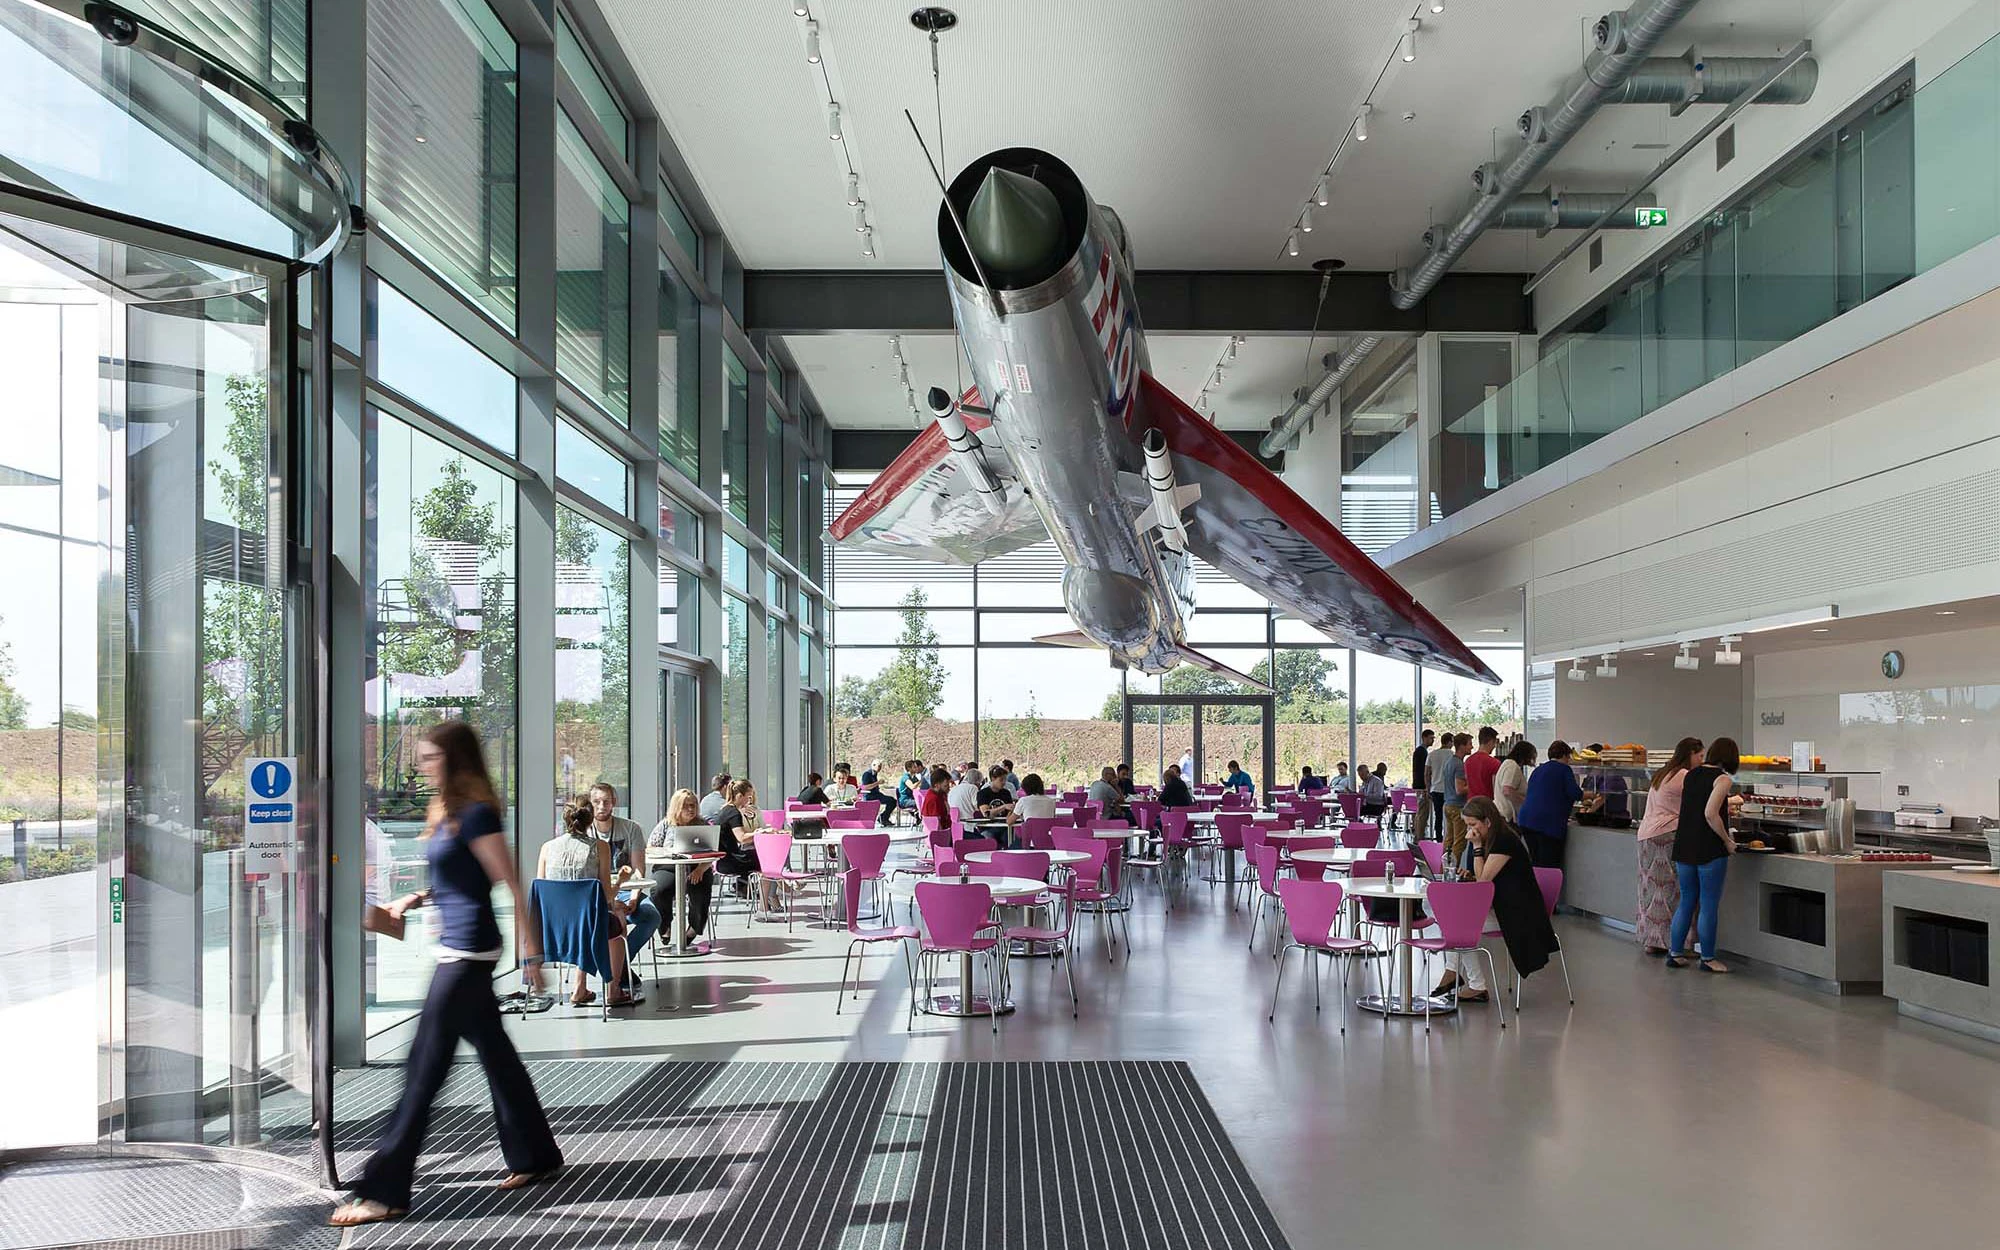 Interior Cafeteria at Dyson R&D